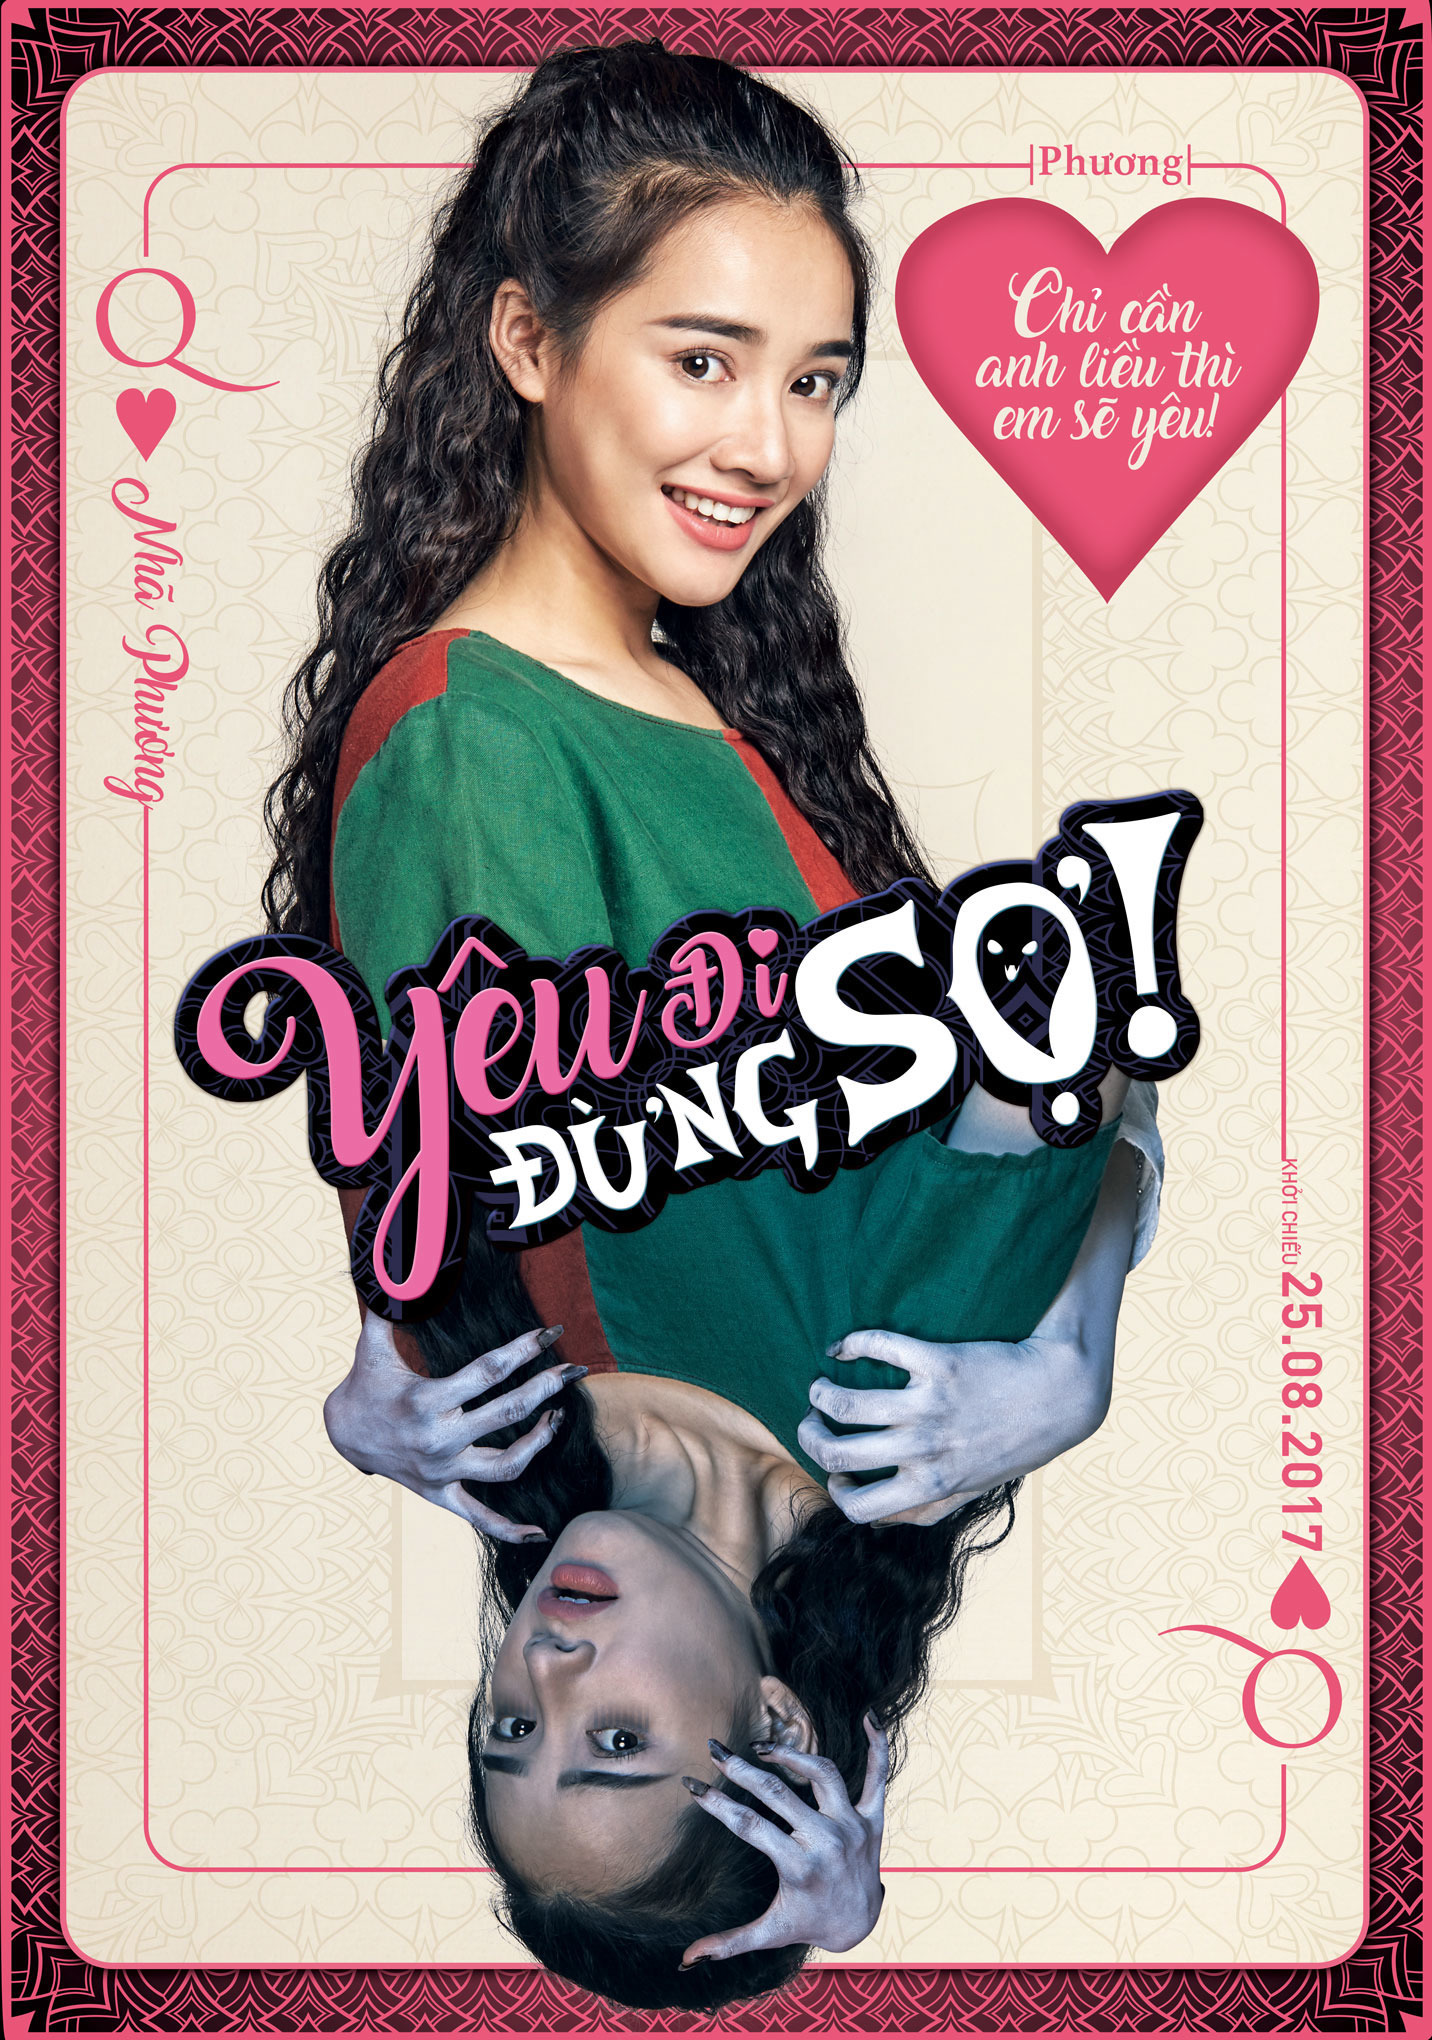 Mega Sized Movie Poster Image for Yeu Di, Dung So! (#3 of 7)